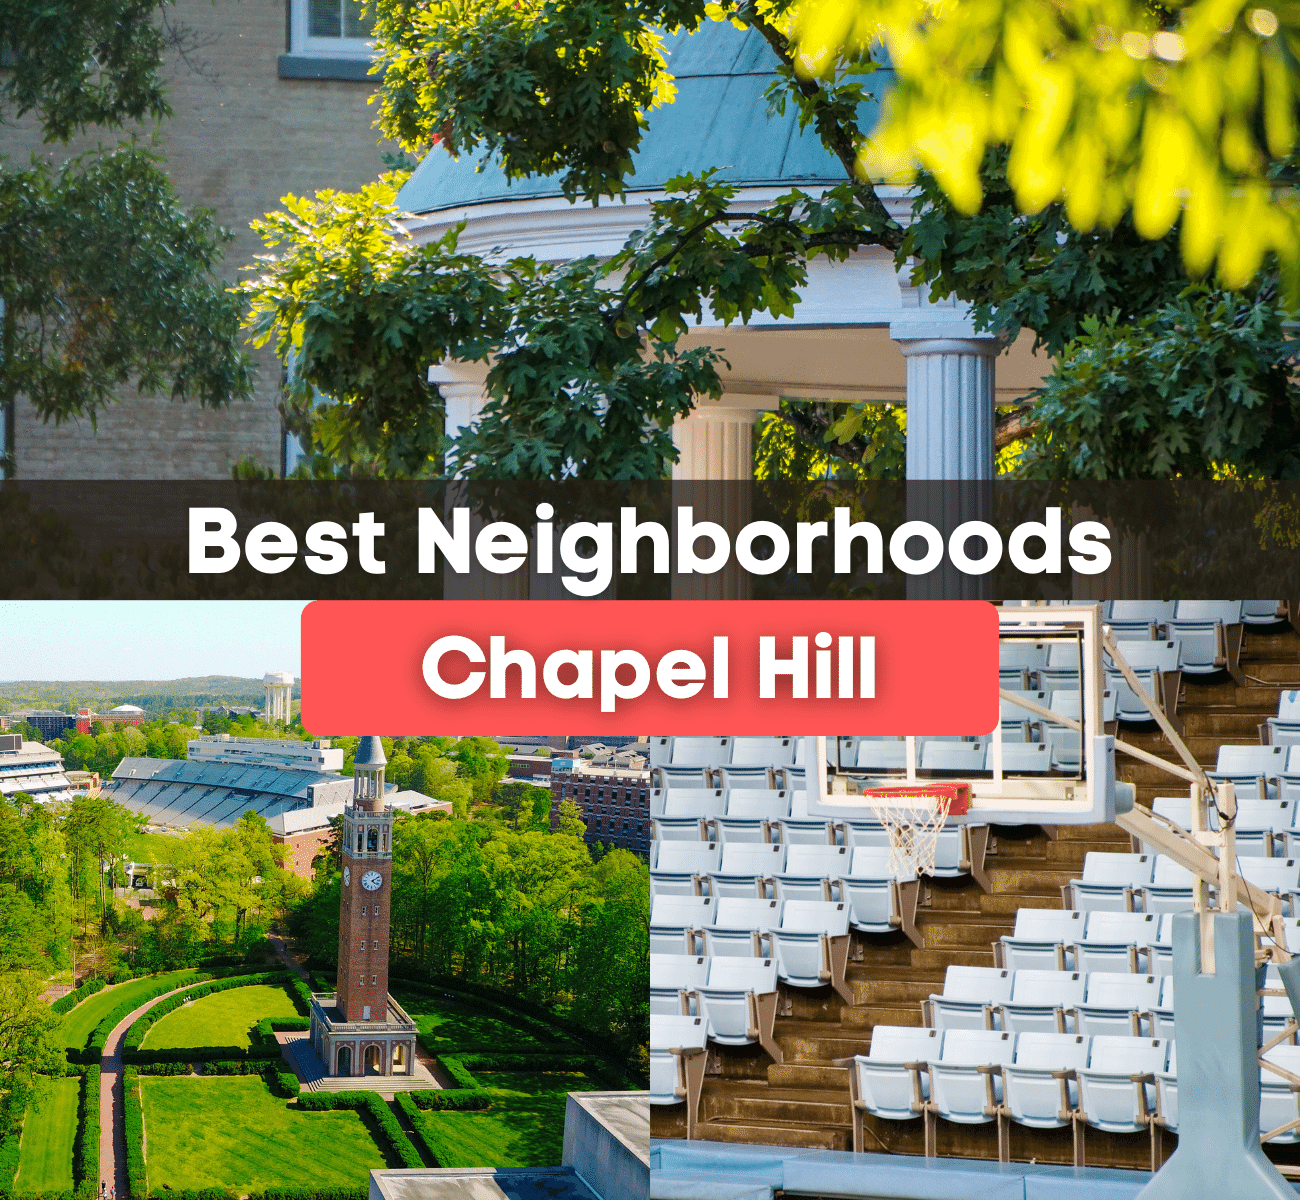 Best Neighborhoods in Chapel Hill, NC - Where are the best places to live in Chapel Hill?